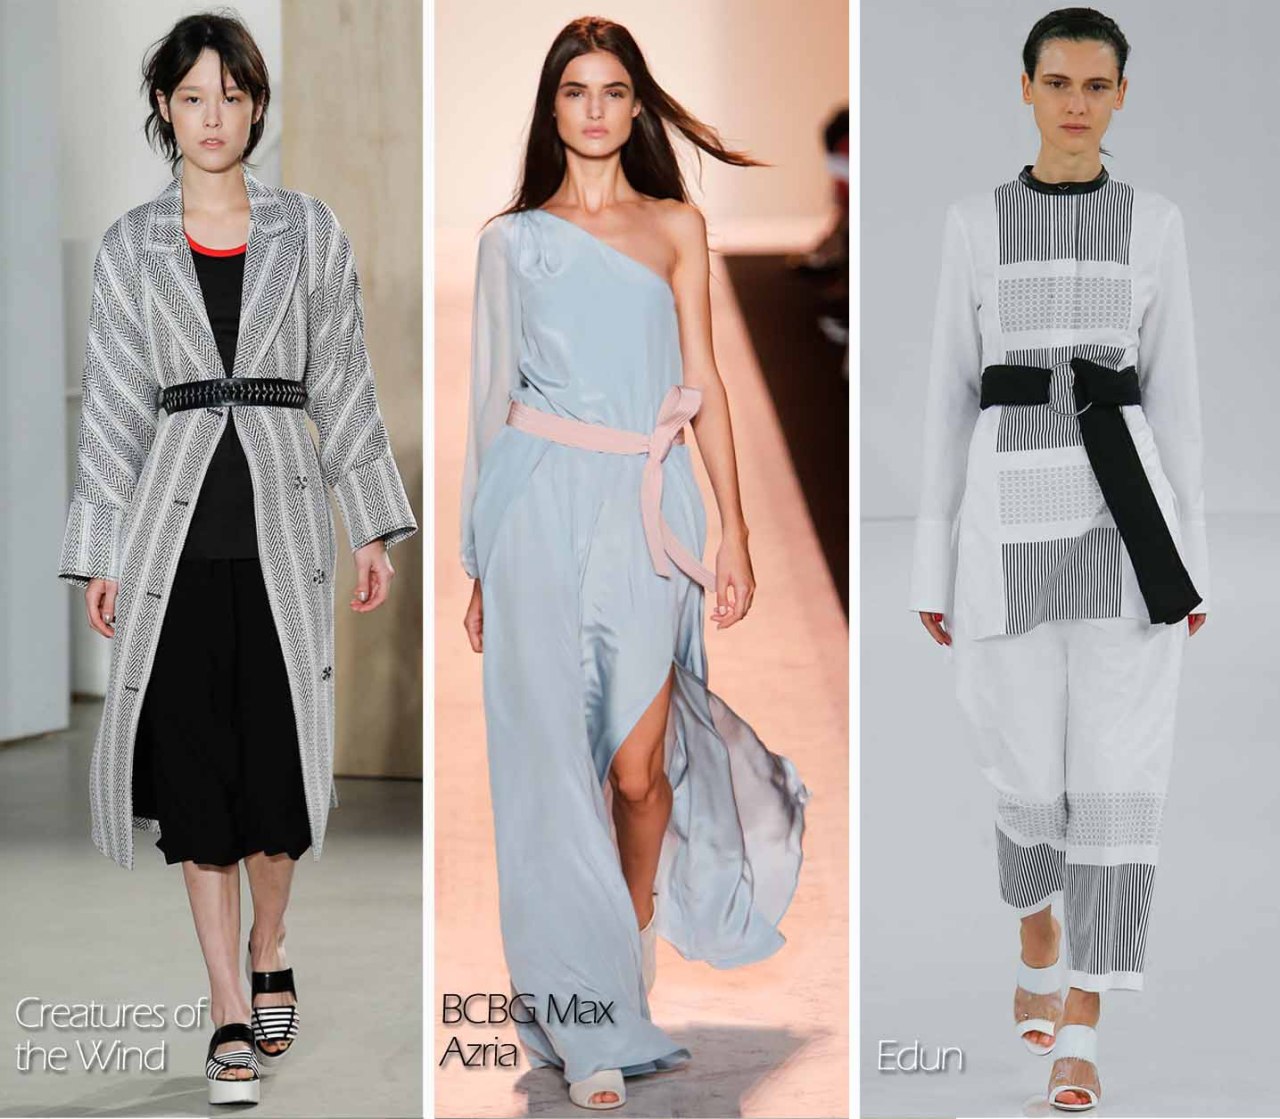 Inspected Trend: Put A Belt On It featuring Creatures of the Wind, BCBG, Edun